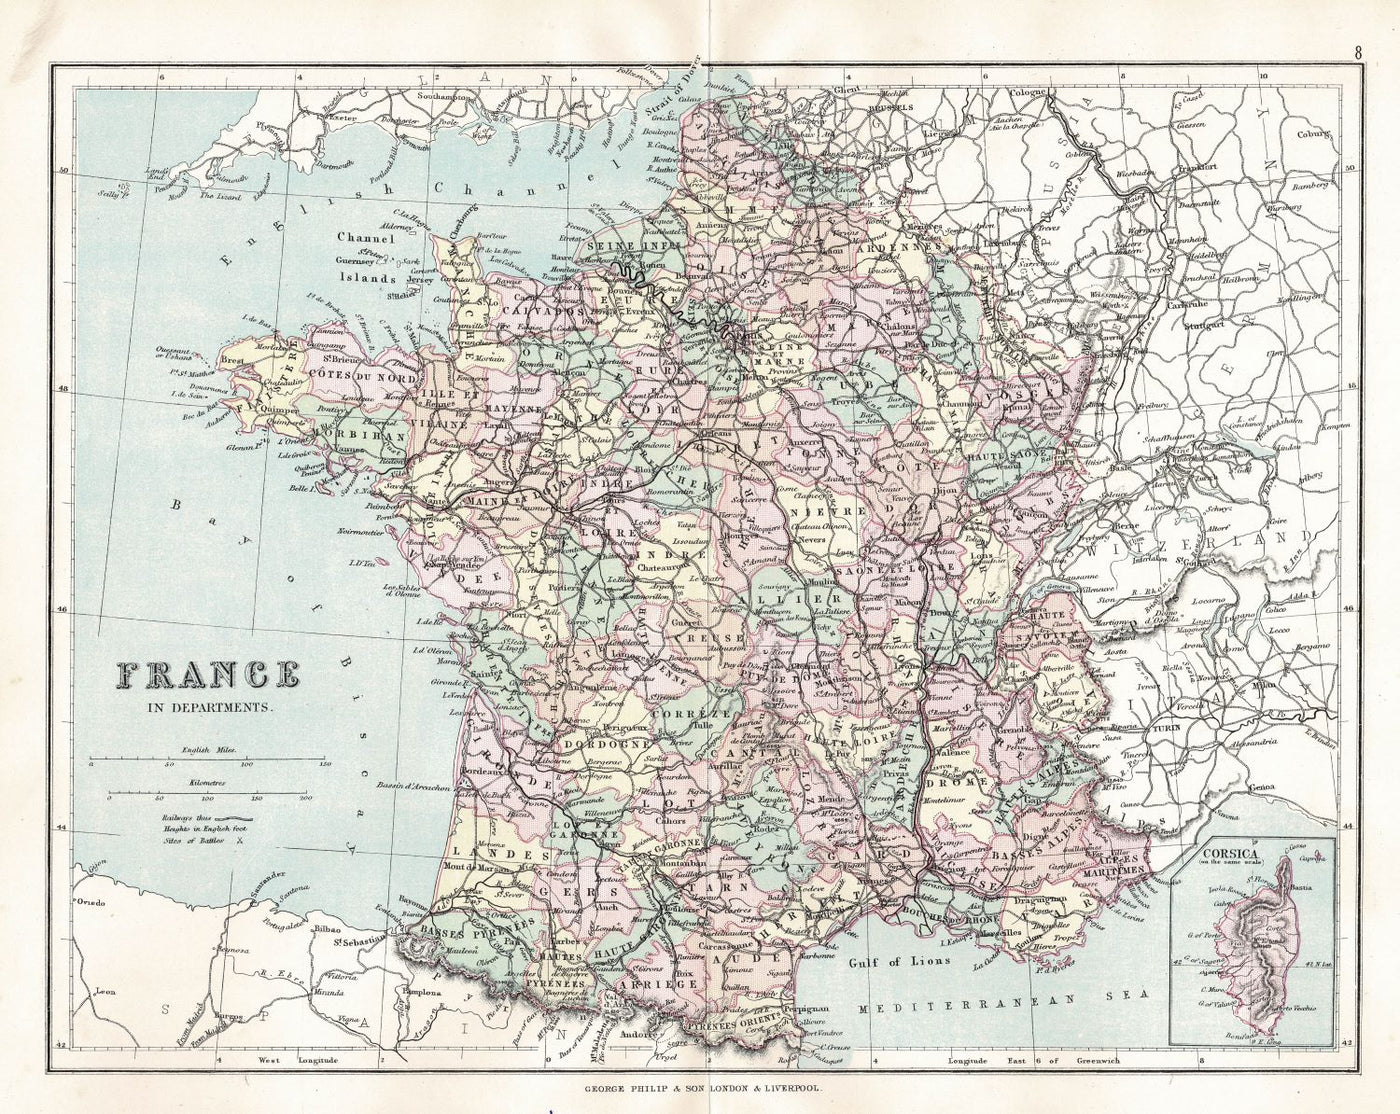 France in Departments antique map, 1891